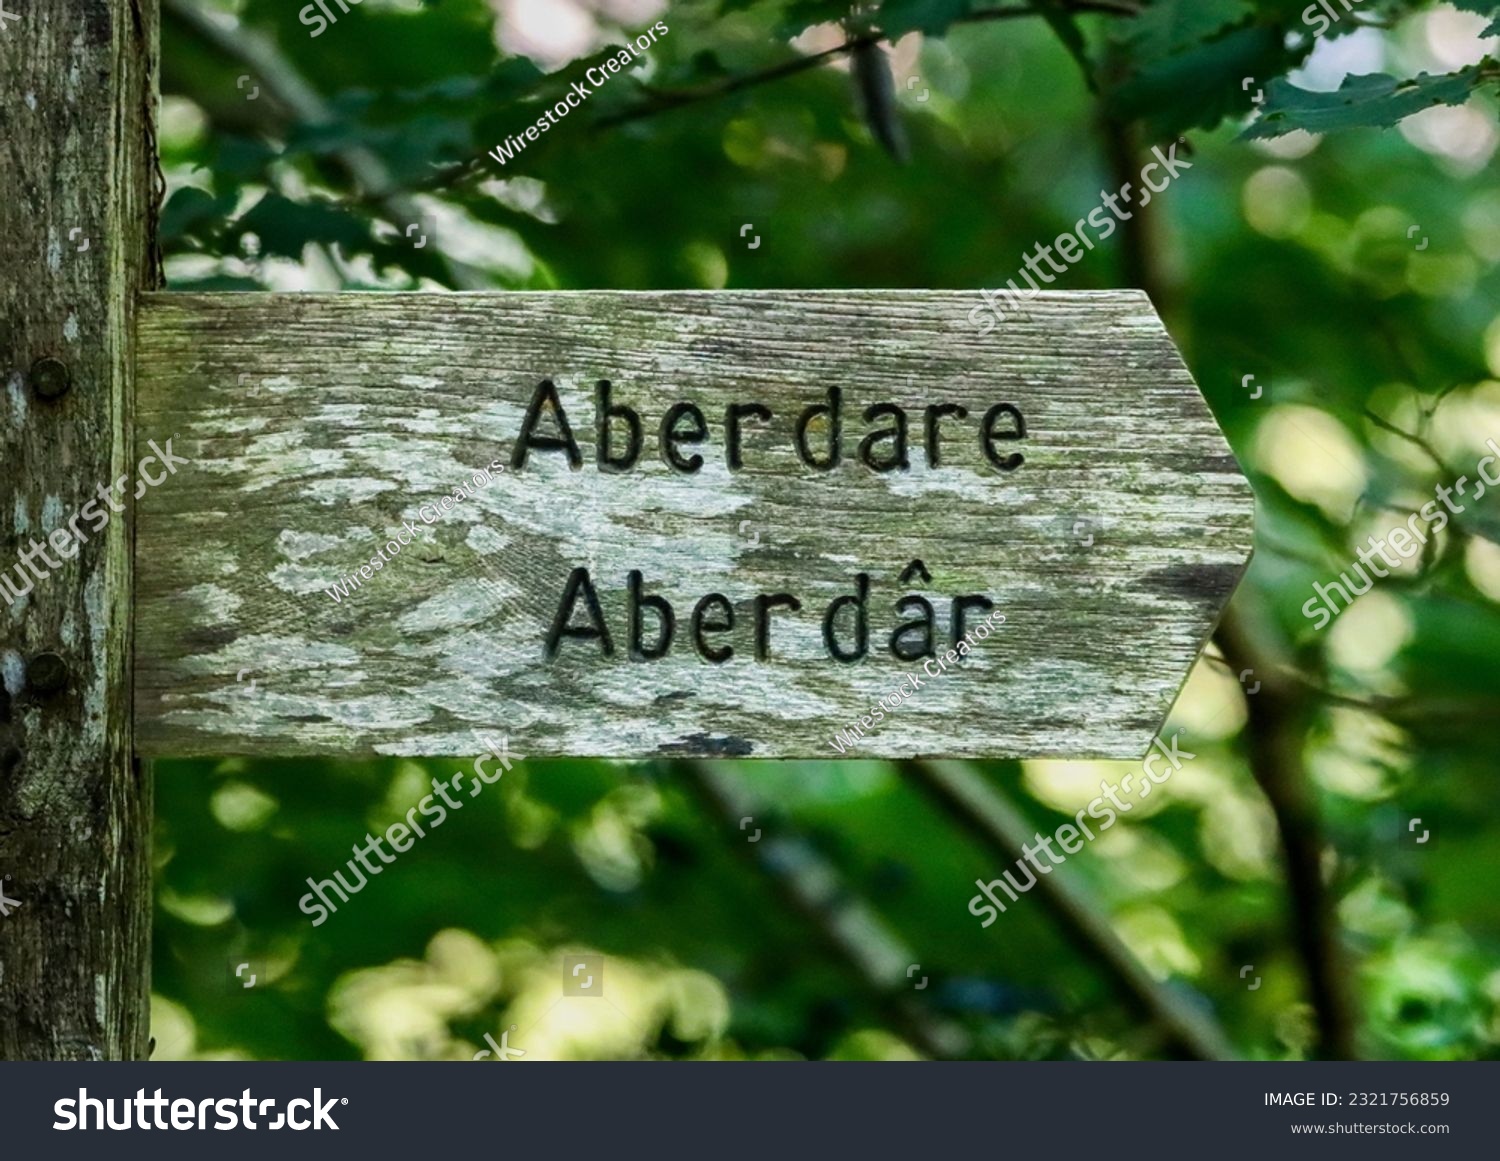 A closeup of the Aberdare sign at The Dare Valley Country Park, South Wales #2321756859